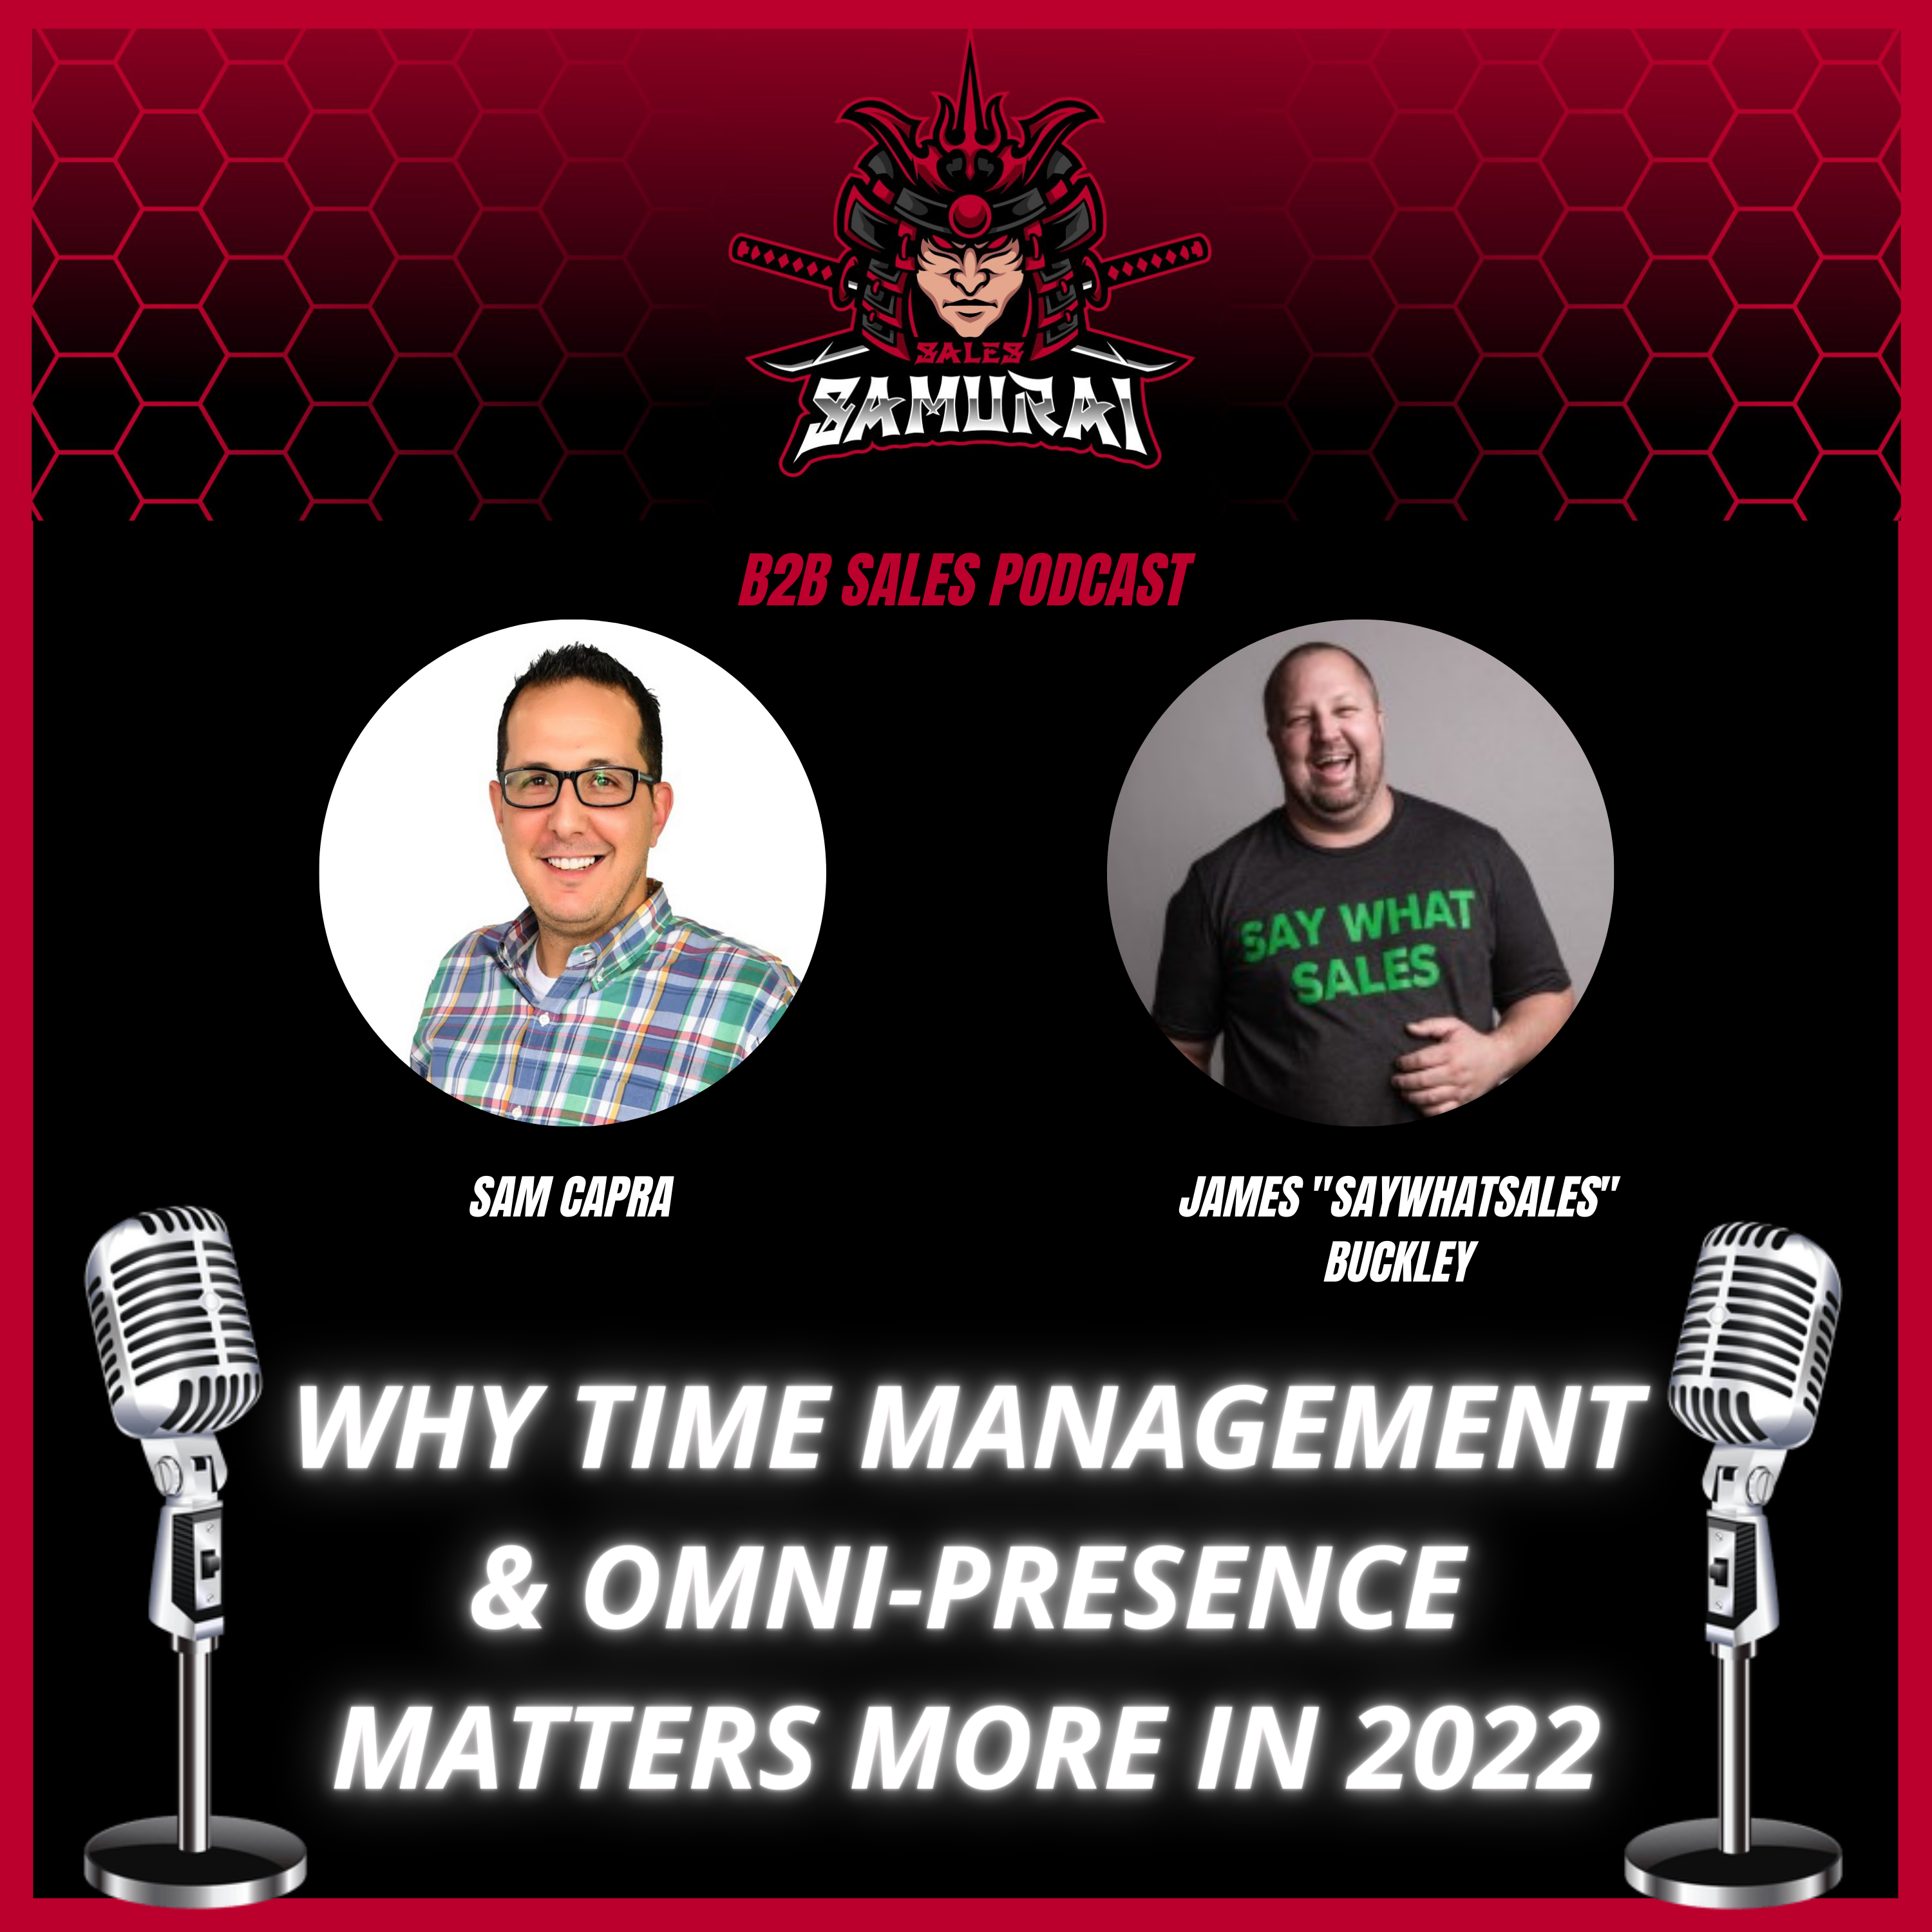 Why Time Management & Omni-Presence MATTERS more in 2022